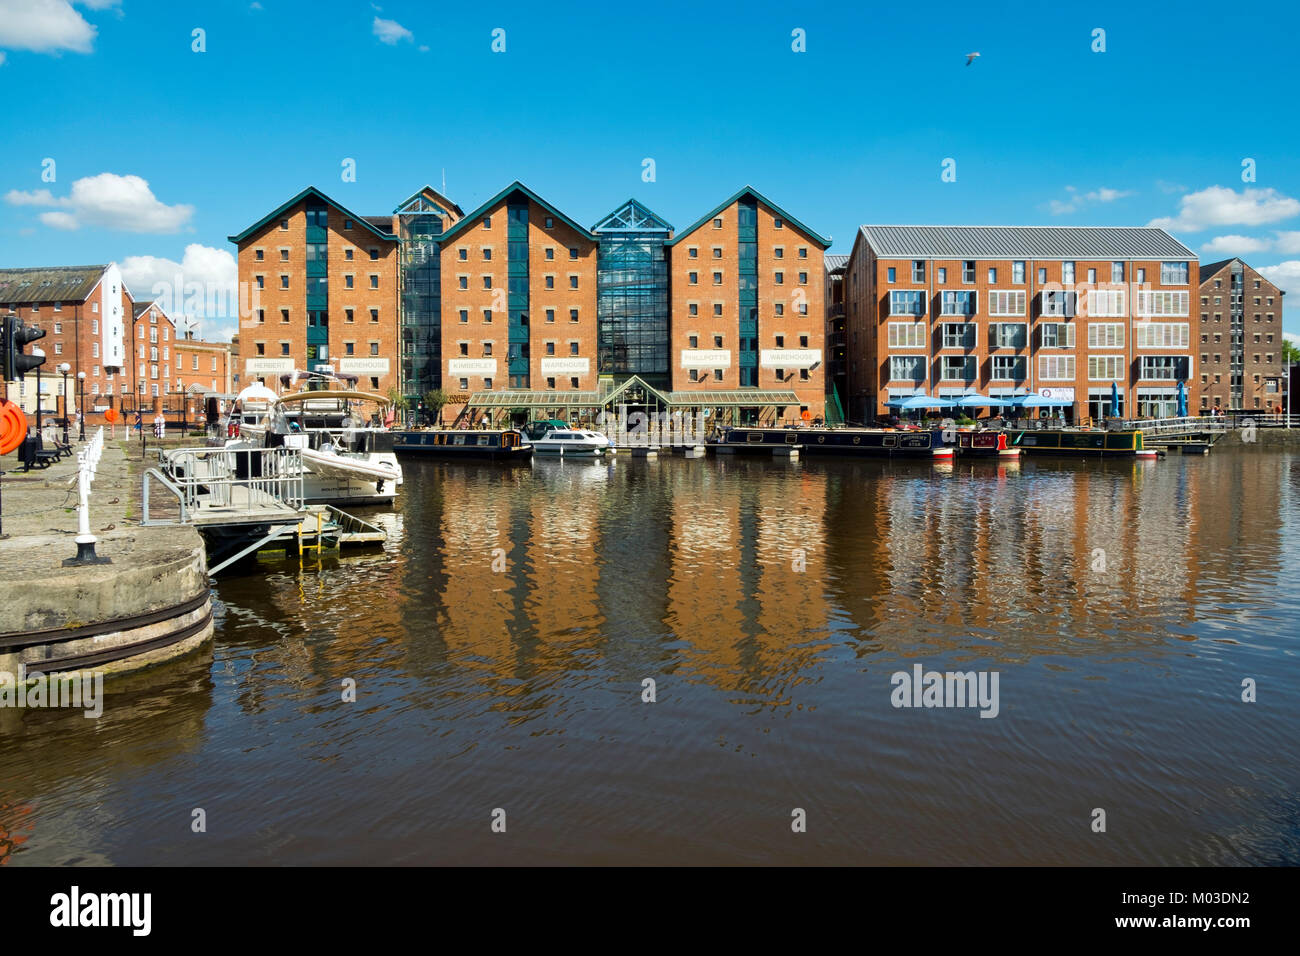 Gloucester, UK - 18th July 2016: Refurbished and new buildings house commercial enterprises and residential spaces around regenerated Gloucester Docks, Gloucester, UK. This historic docks area can trace its roots back to the 1800's and was once the UK’s most inland shipping port. Today leisure boating has mostly replaced the ships and barges and the docks are a lively visitor attraction. Stock Photo